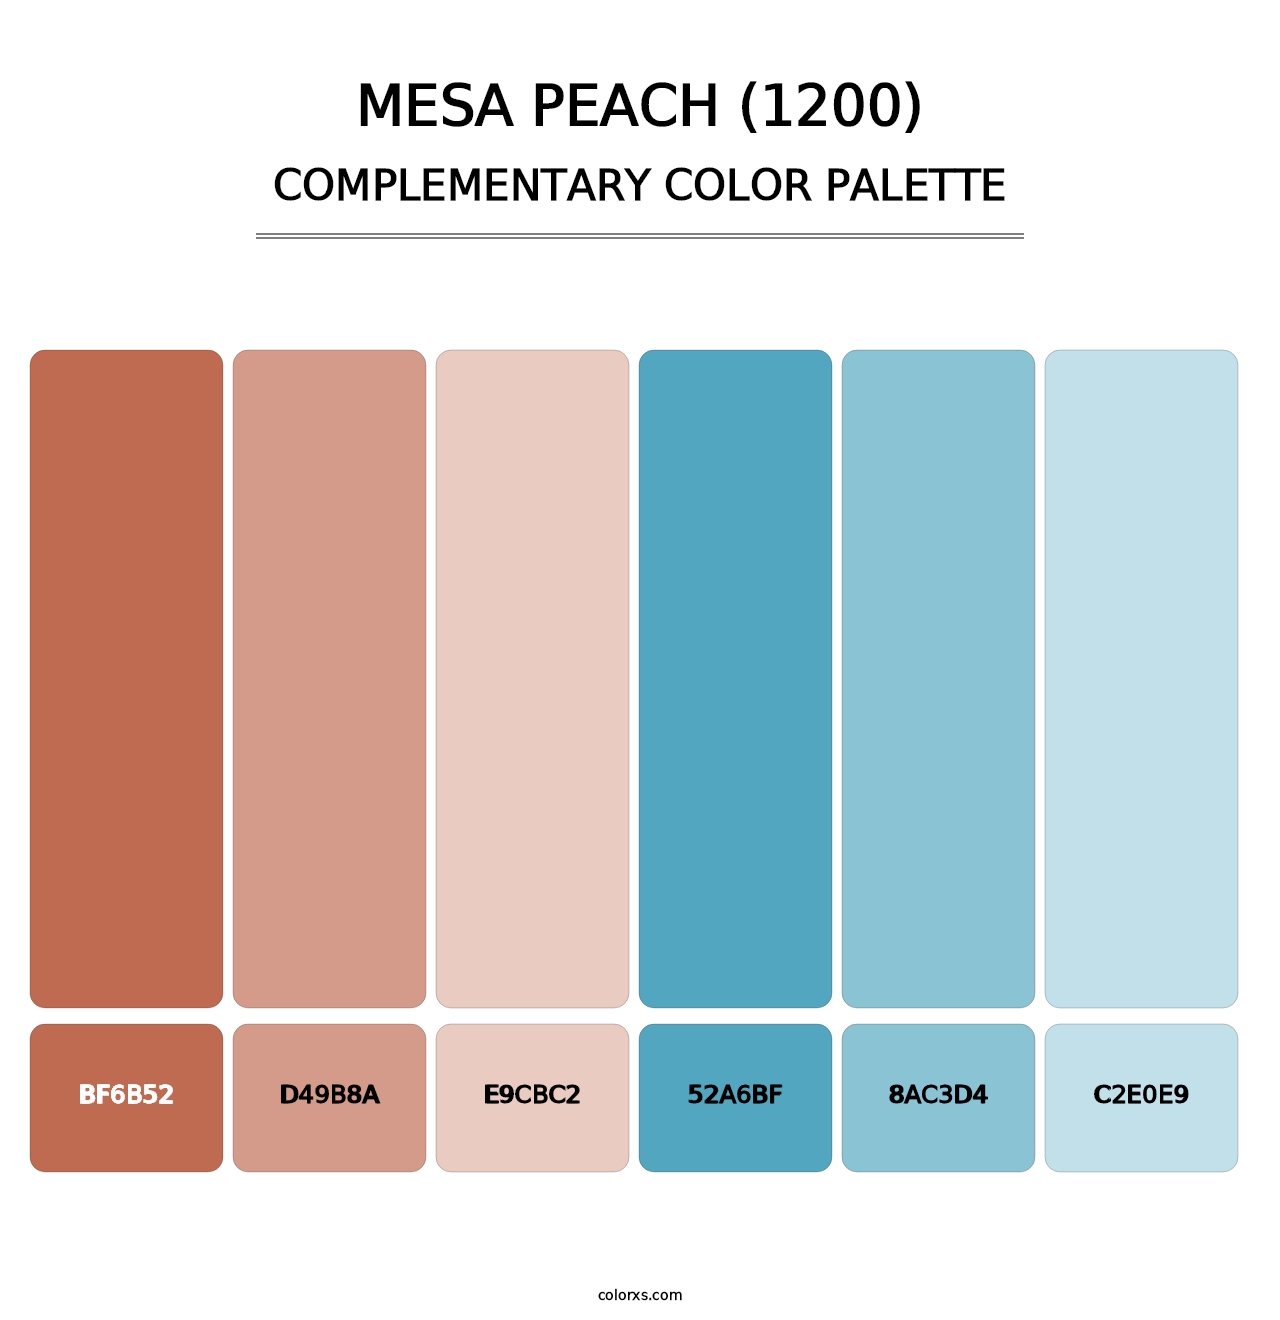 Mesa Peach (1200) - Complementary Color Palette